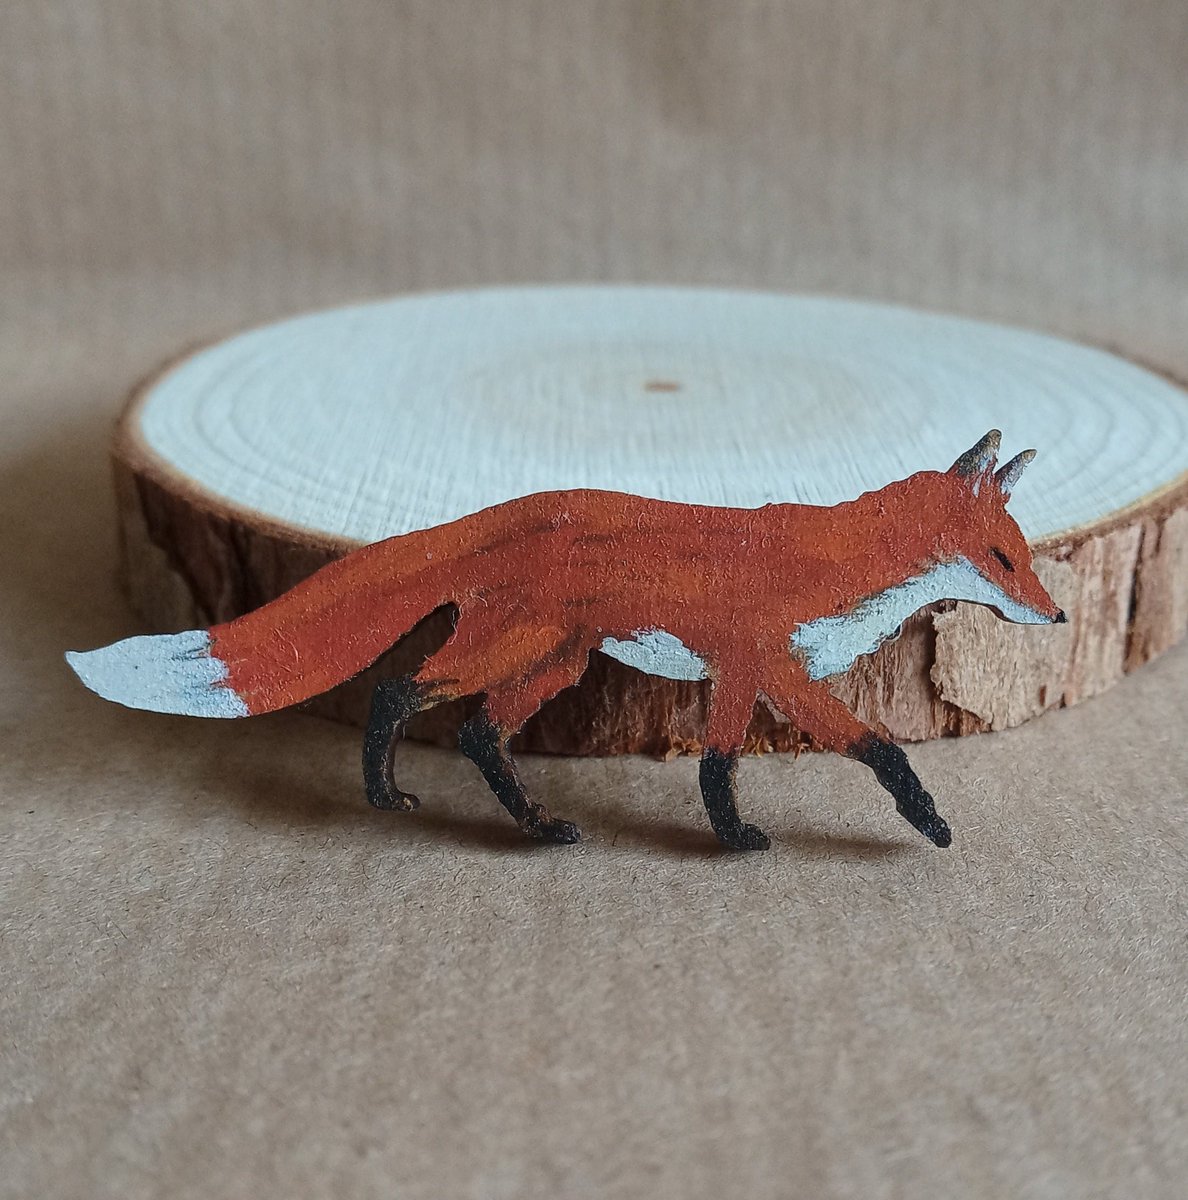 #shopindie Highlighting my sweet little Fox brooch, would look fab on a hat or jacket lapel. craftymissbcrafts.etsy.com/listing/169057…